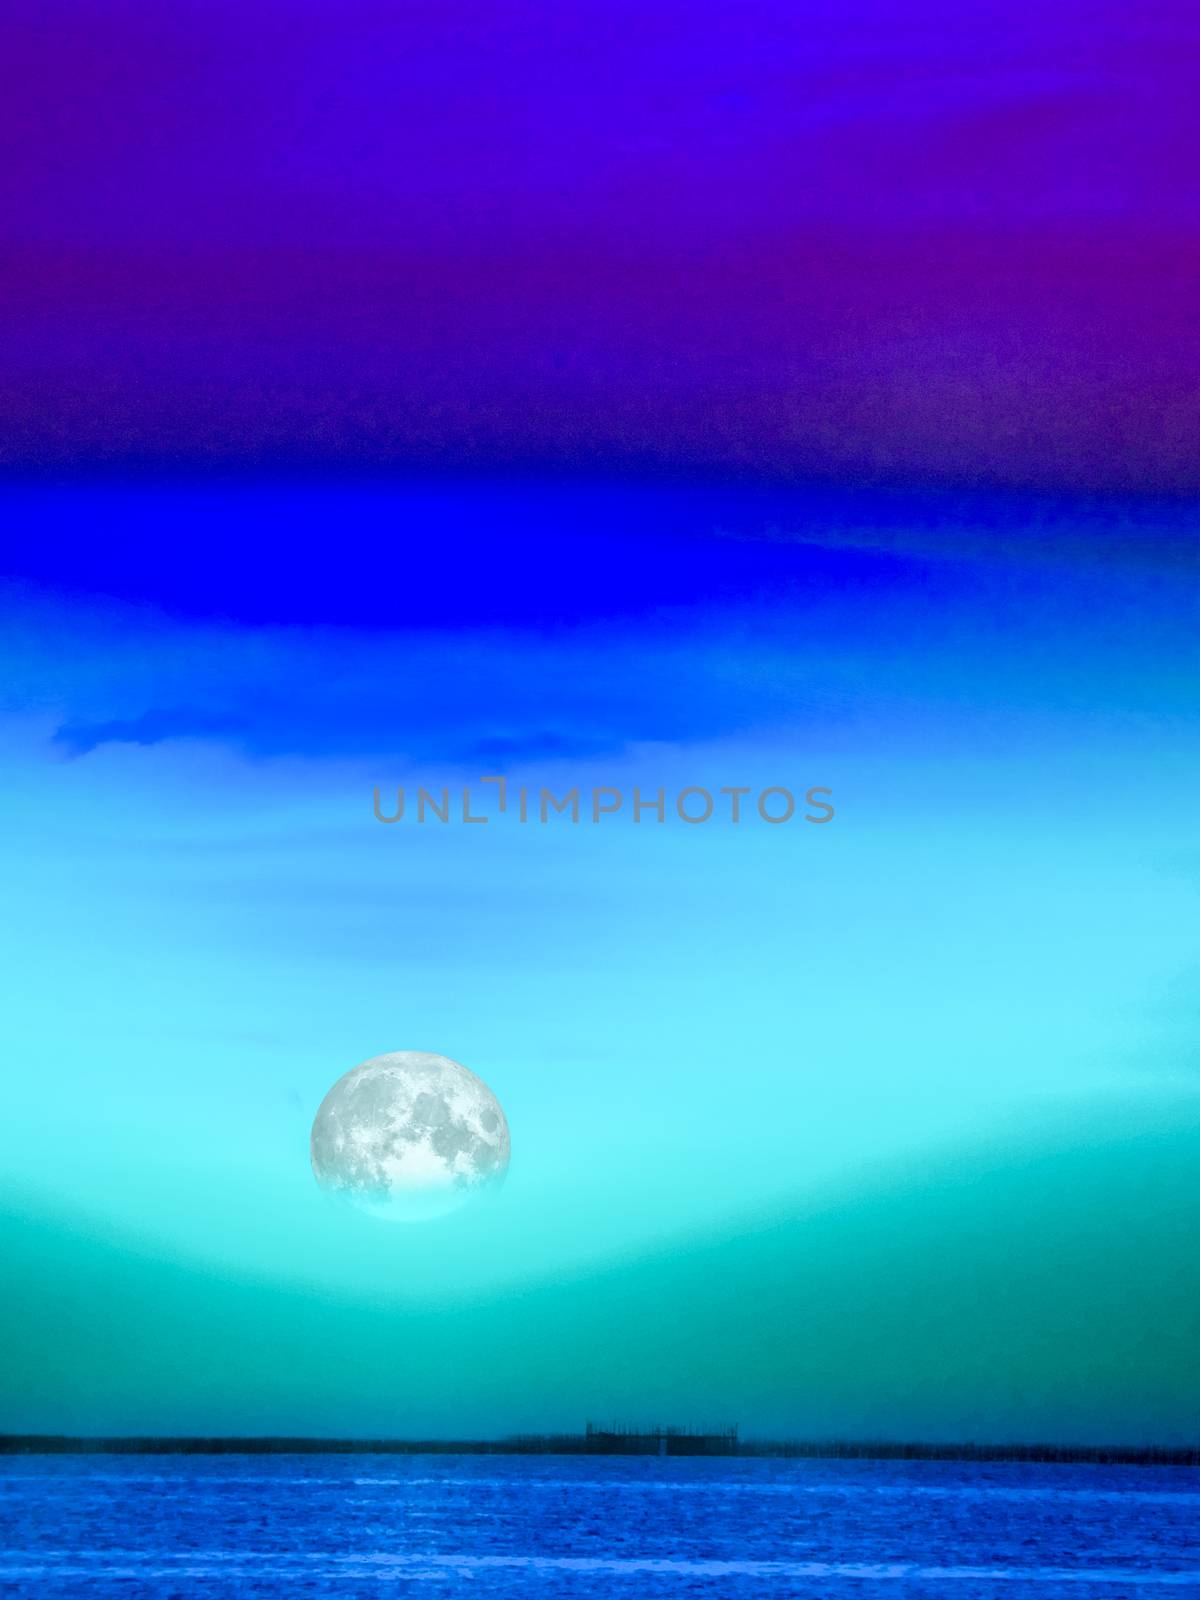 colorful cool tone sky and cloud moonlight in the sea